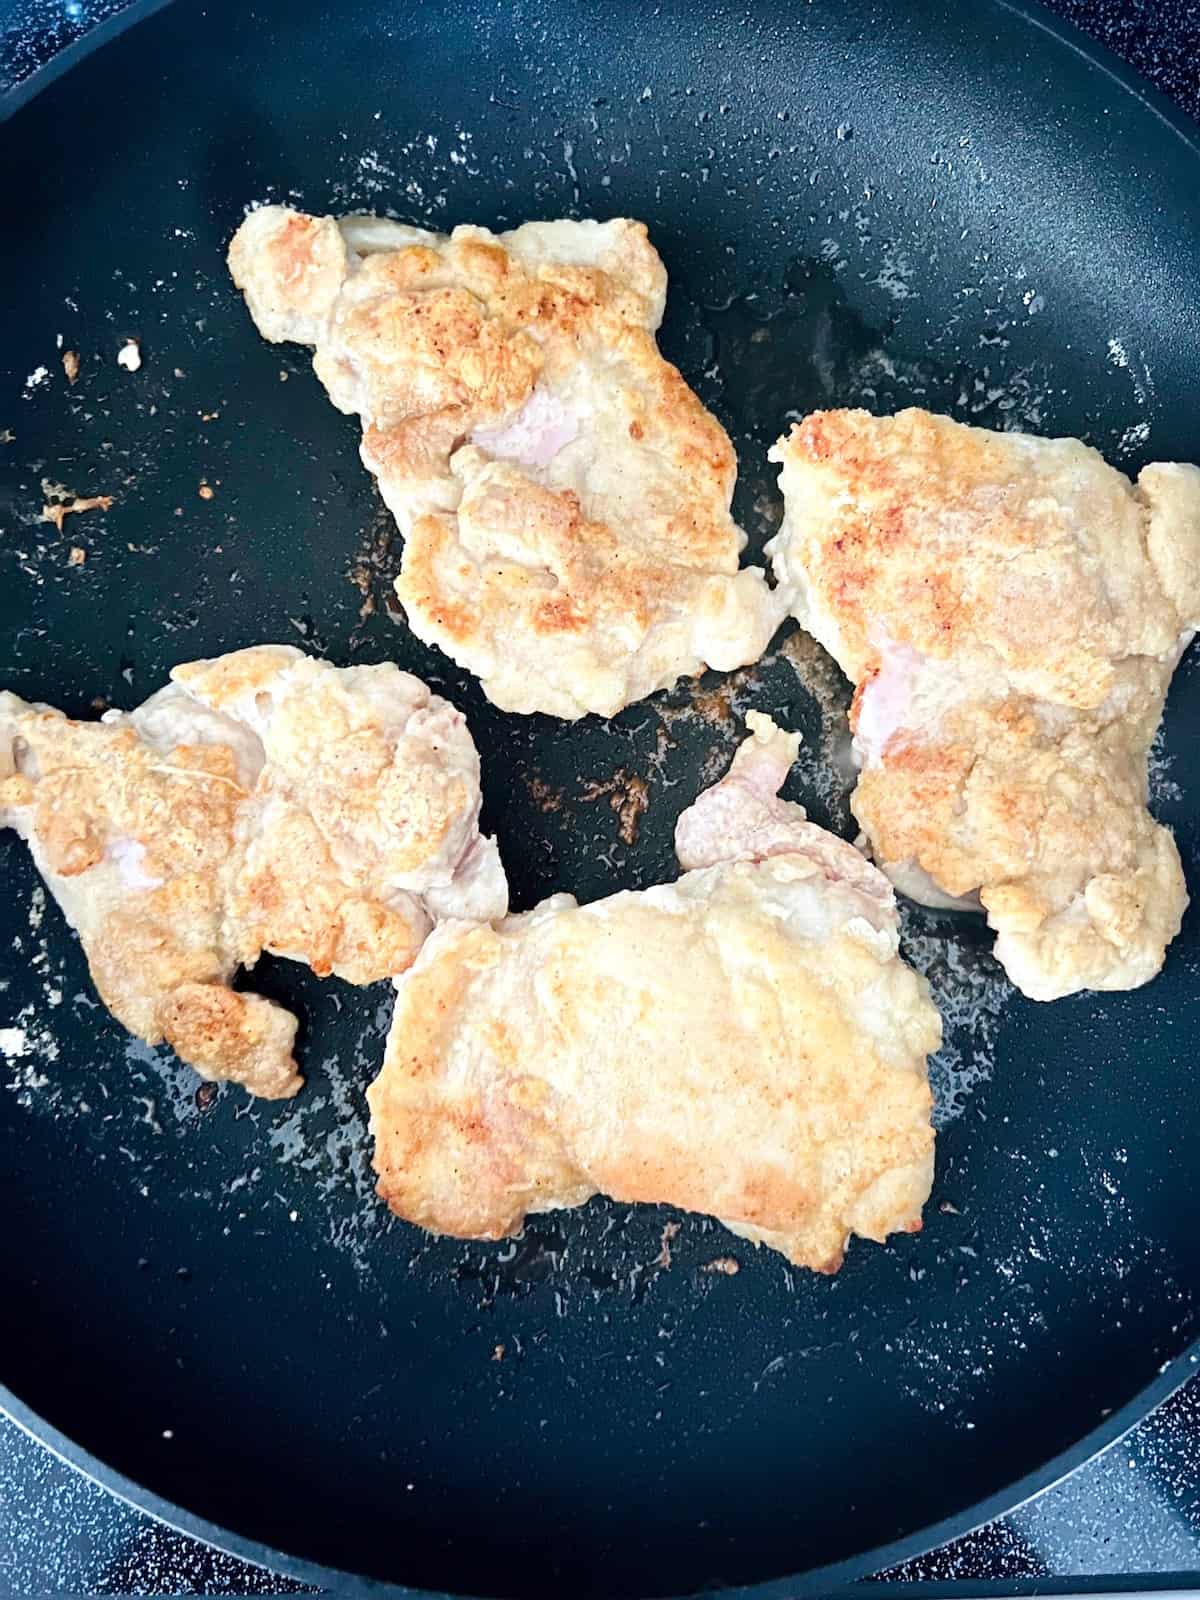 ChickenÂ Thighs browned in the skillet.